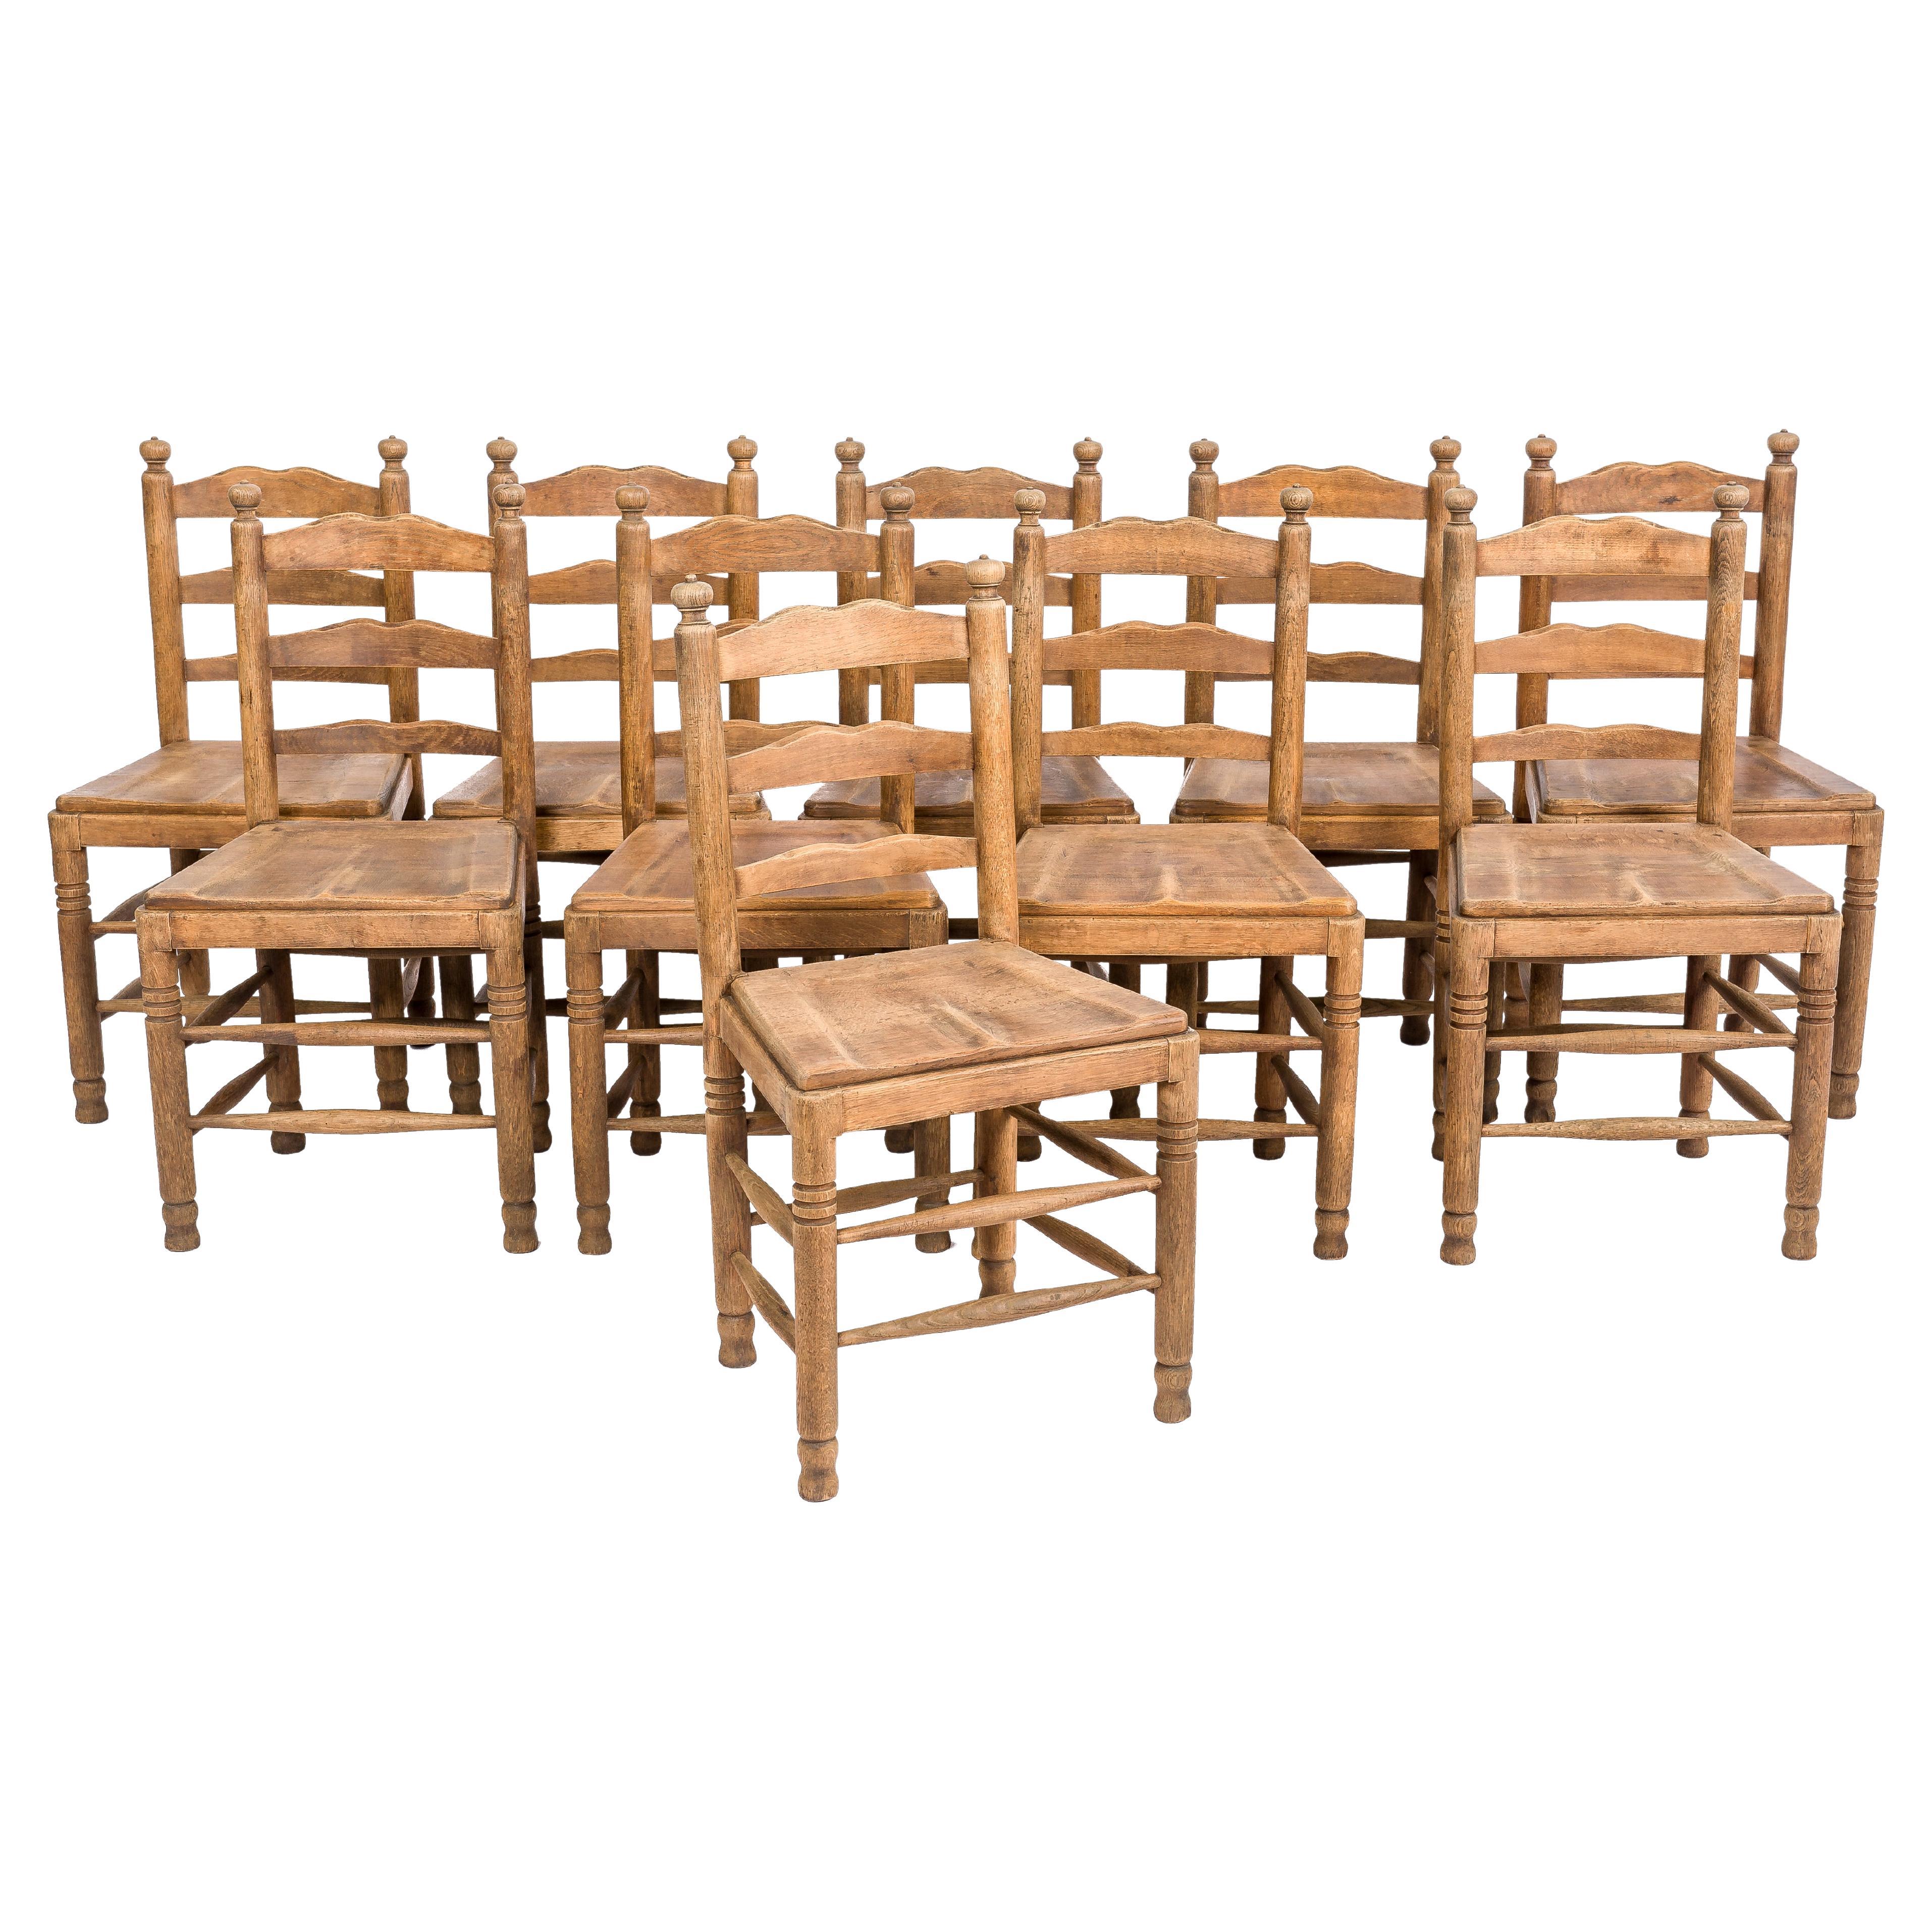 Large Set of Antique Solid Oak French Monastery Dining Chairs Up to 42 Pieces